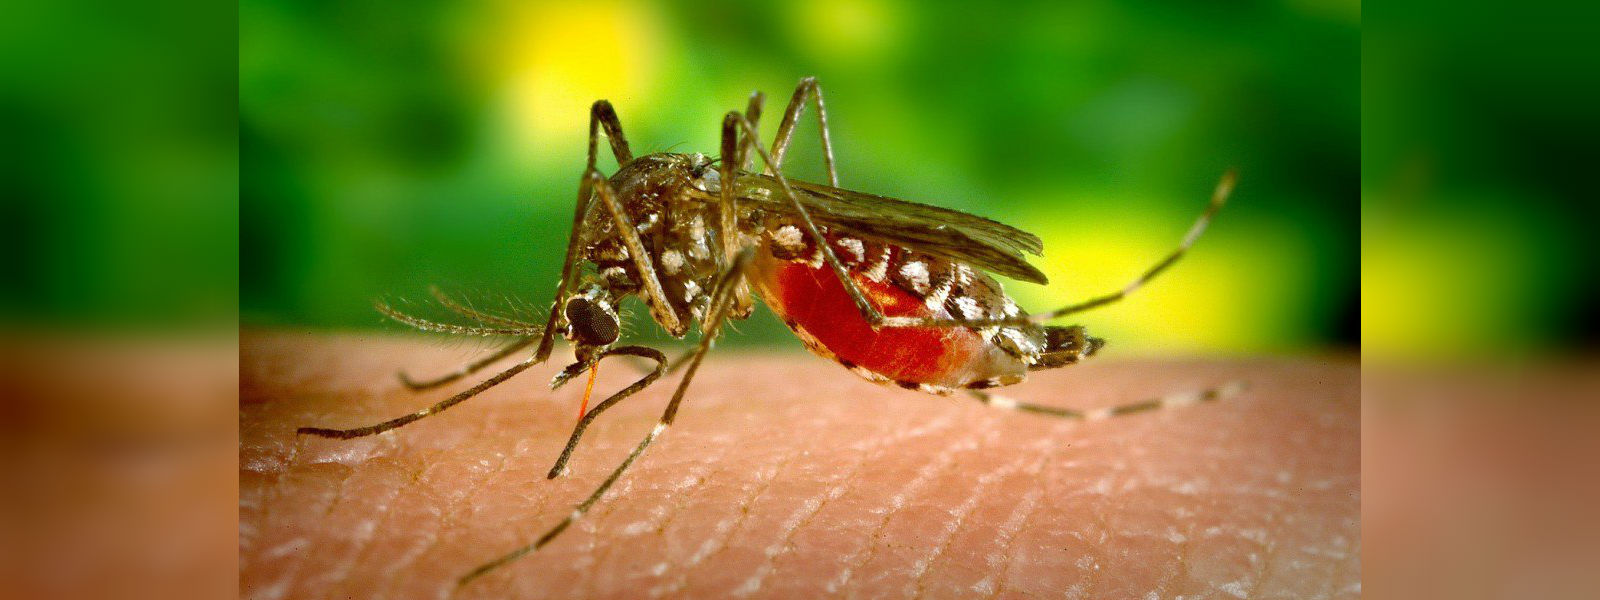 53 Malaria patients reported in 2019